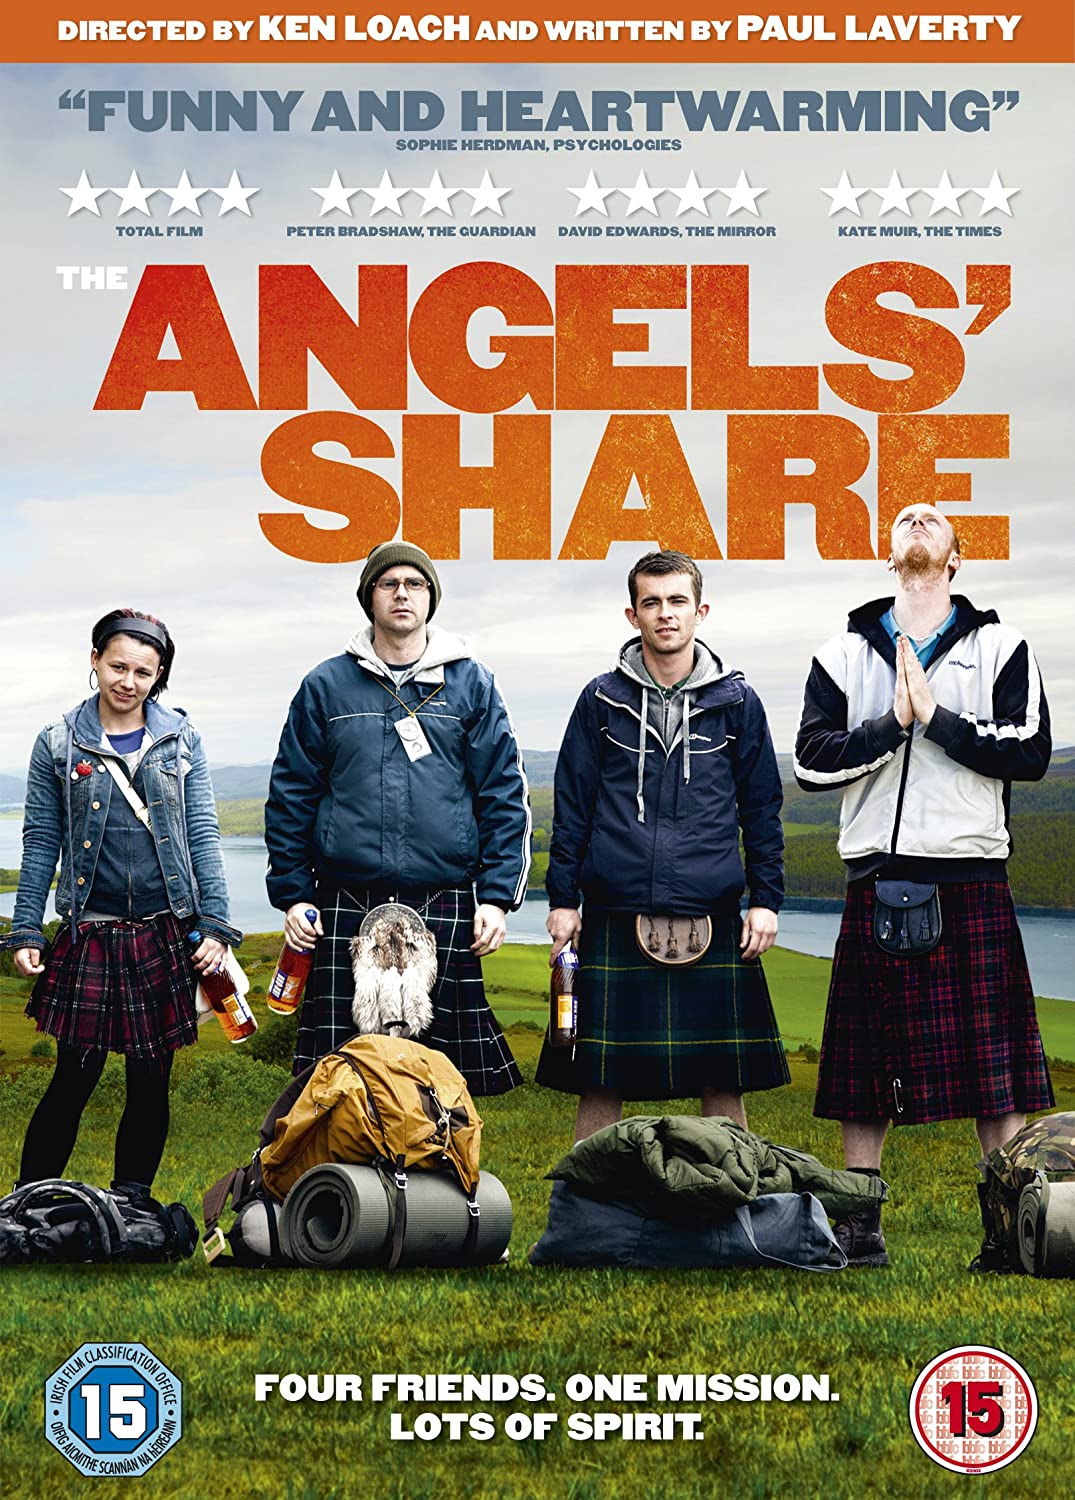 The Angels' Share [DVD]